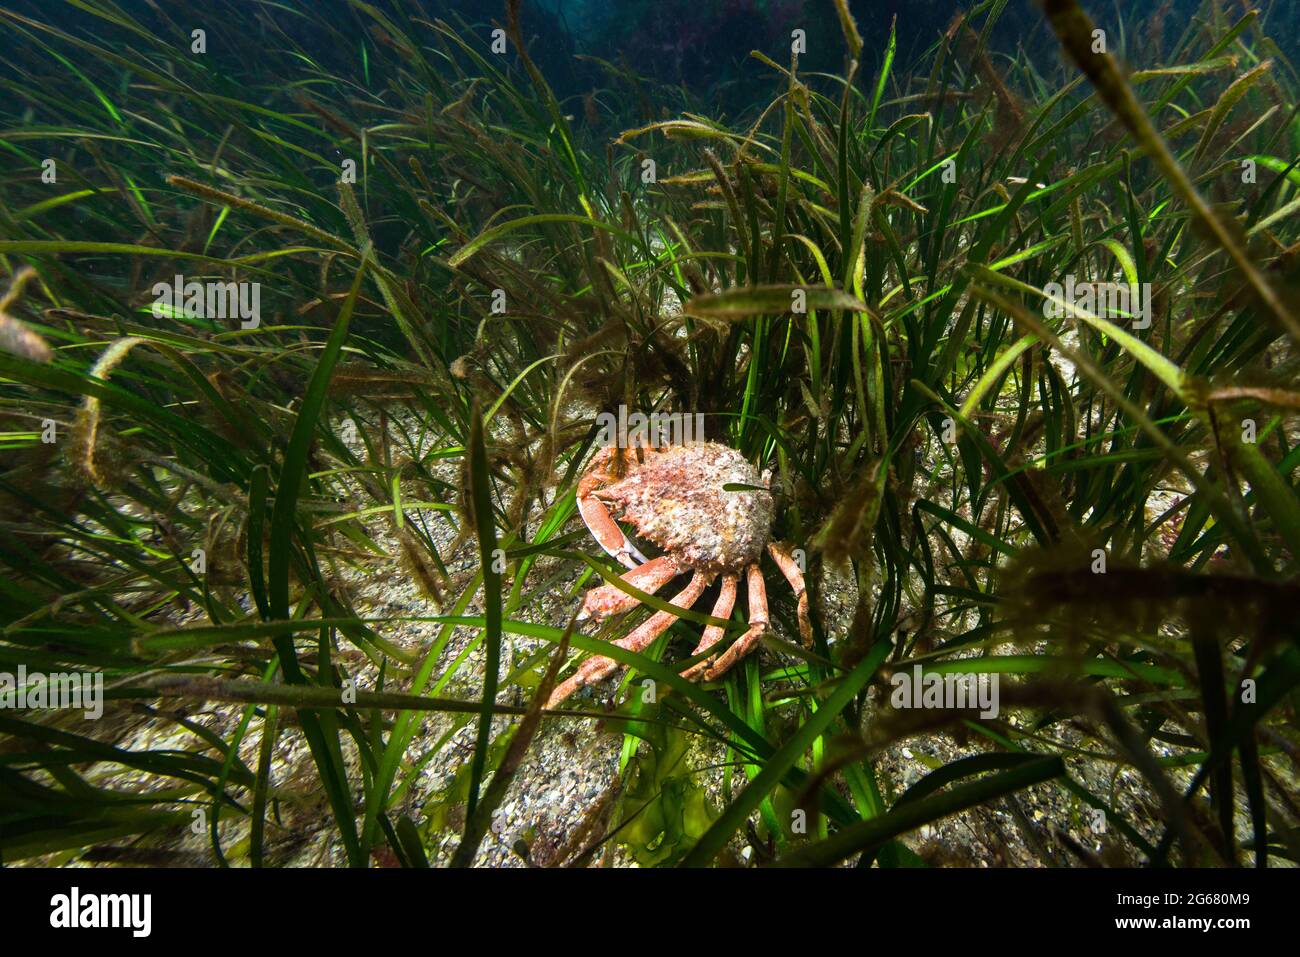 European spider crab in seagrass meadow. Channel Islands, UK. Stock Photo